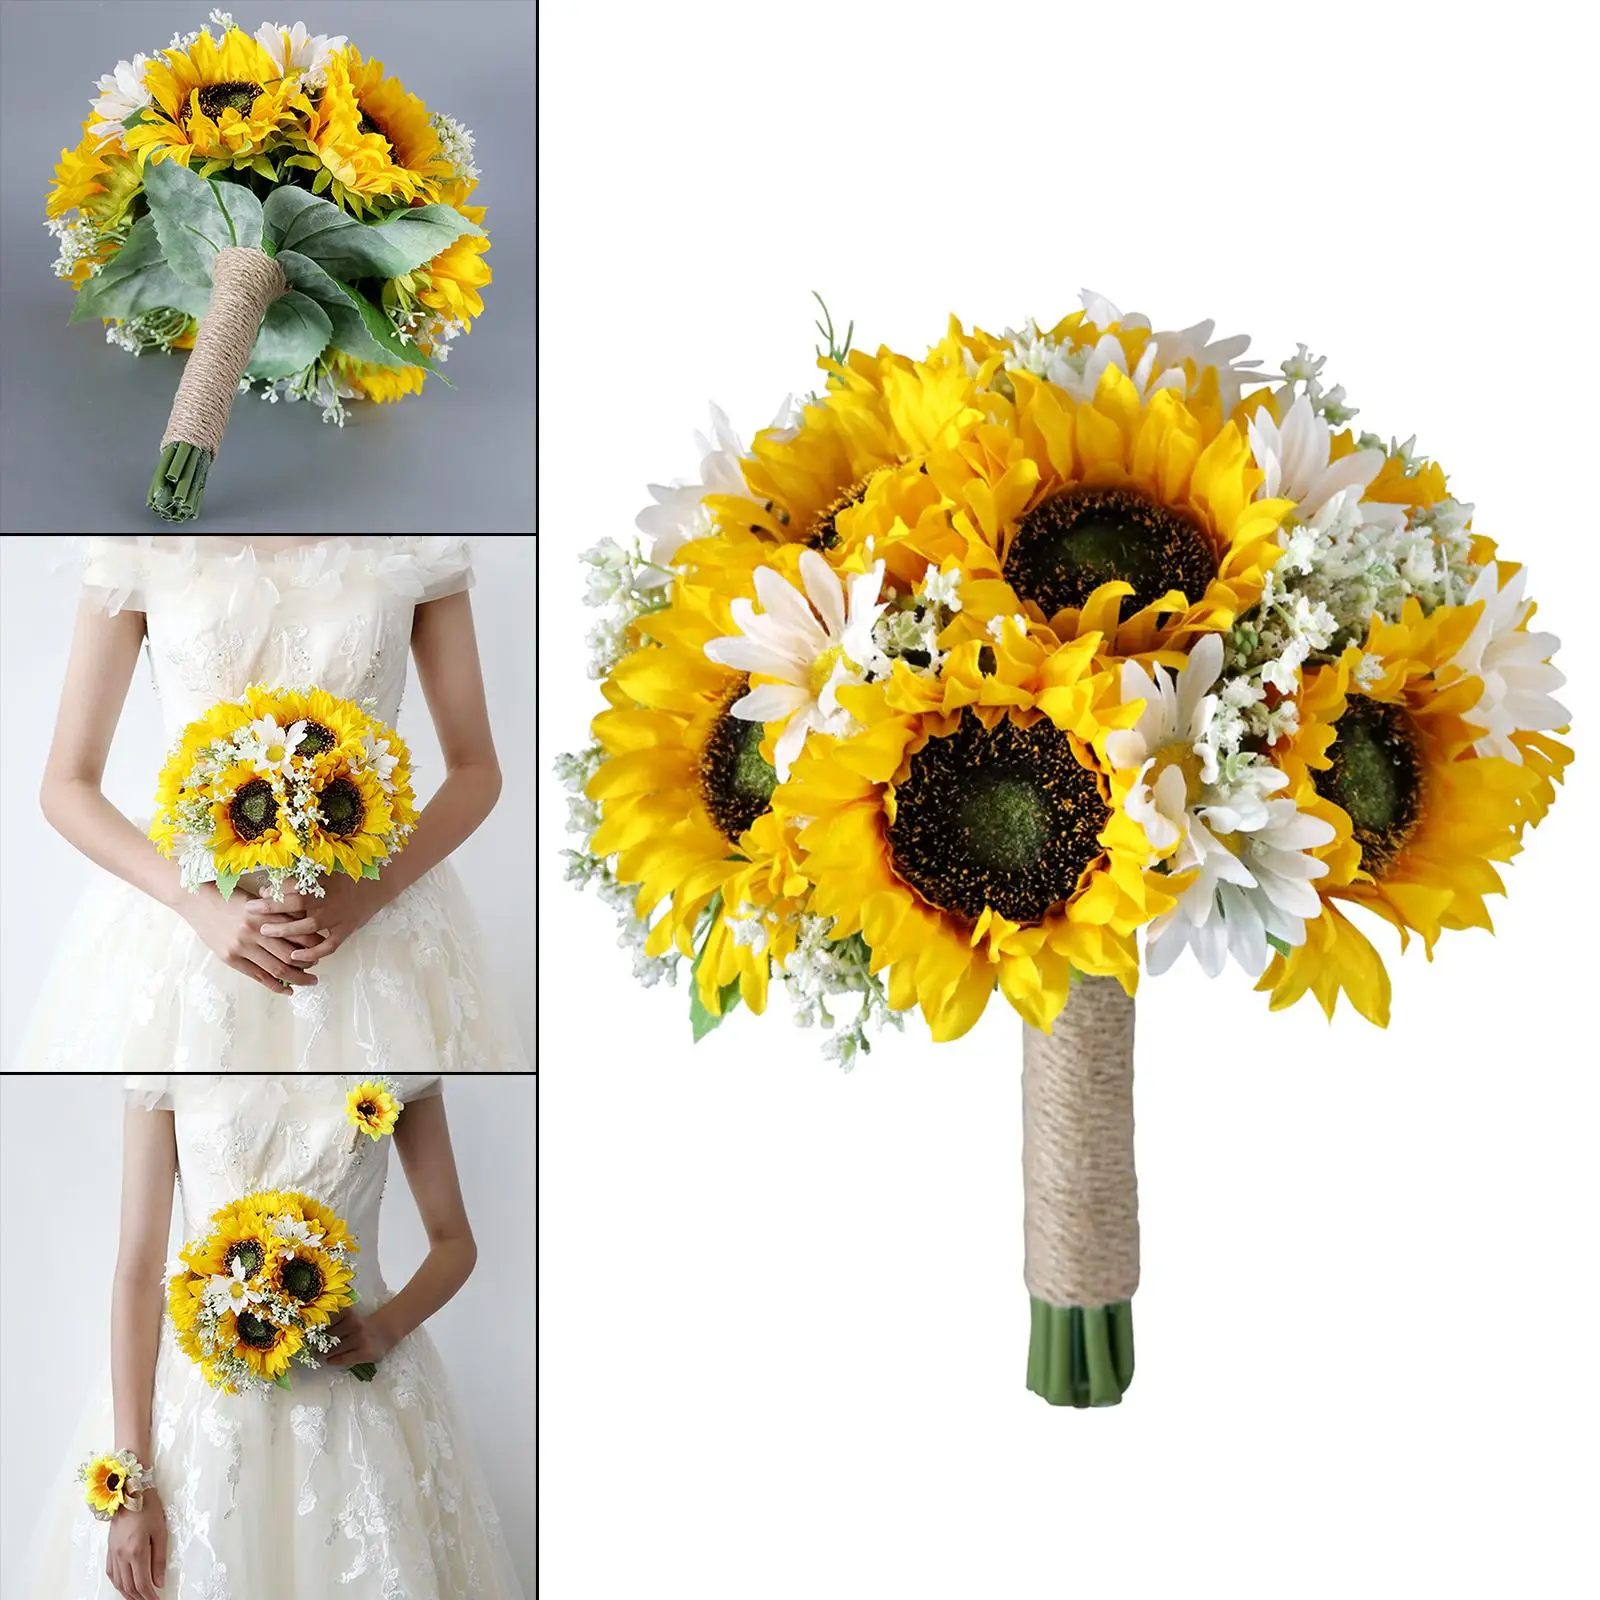 Romantic Wedding Bride Hand Bouquet with Linen Rope Sunflowers Artificial Flowers for Anniversary Ceremony Centerpiece Decor